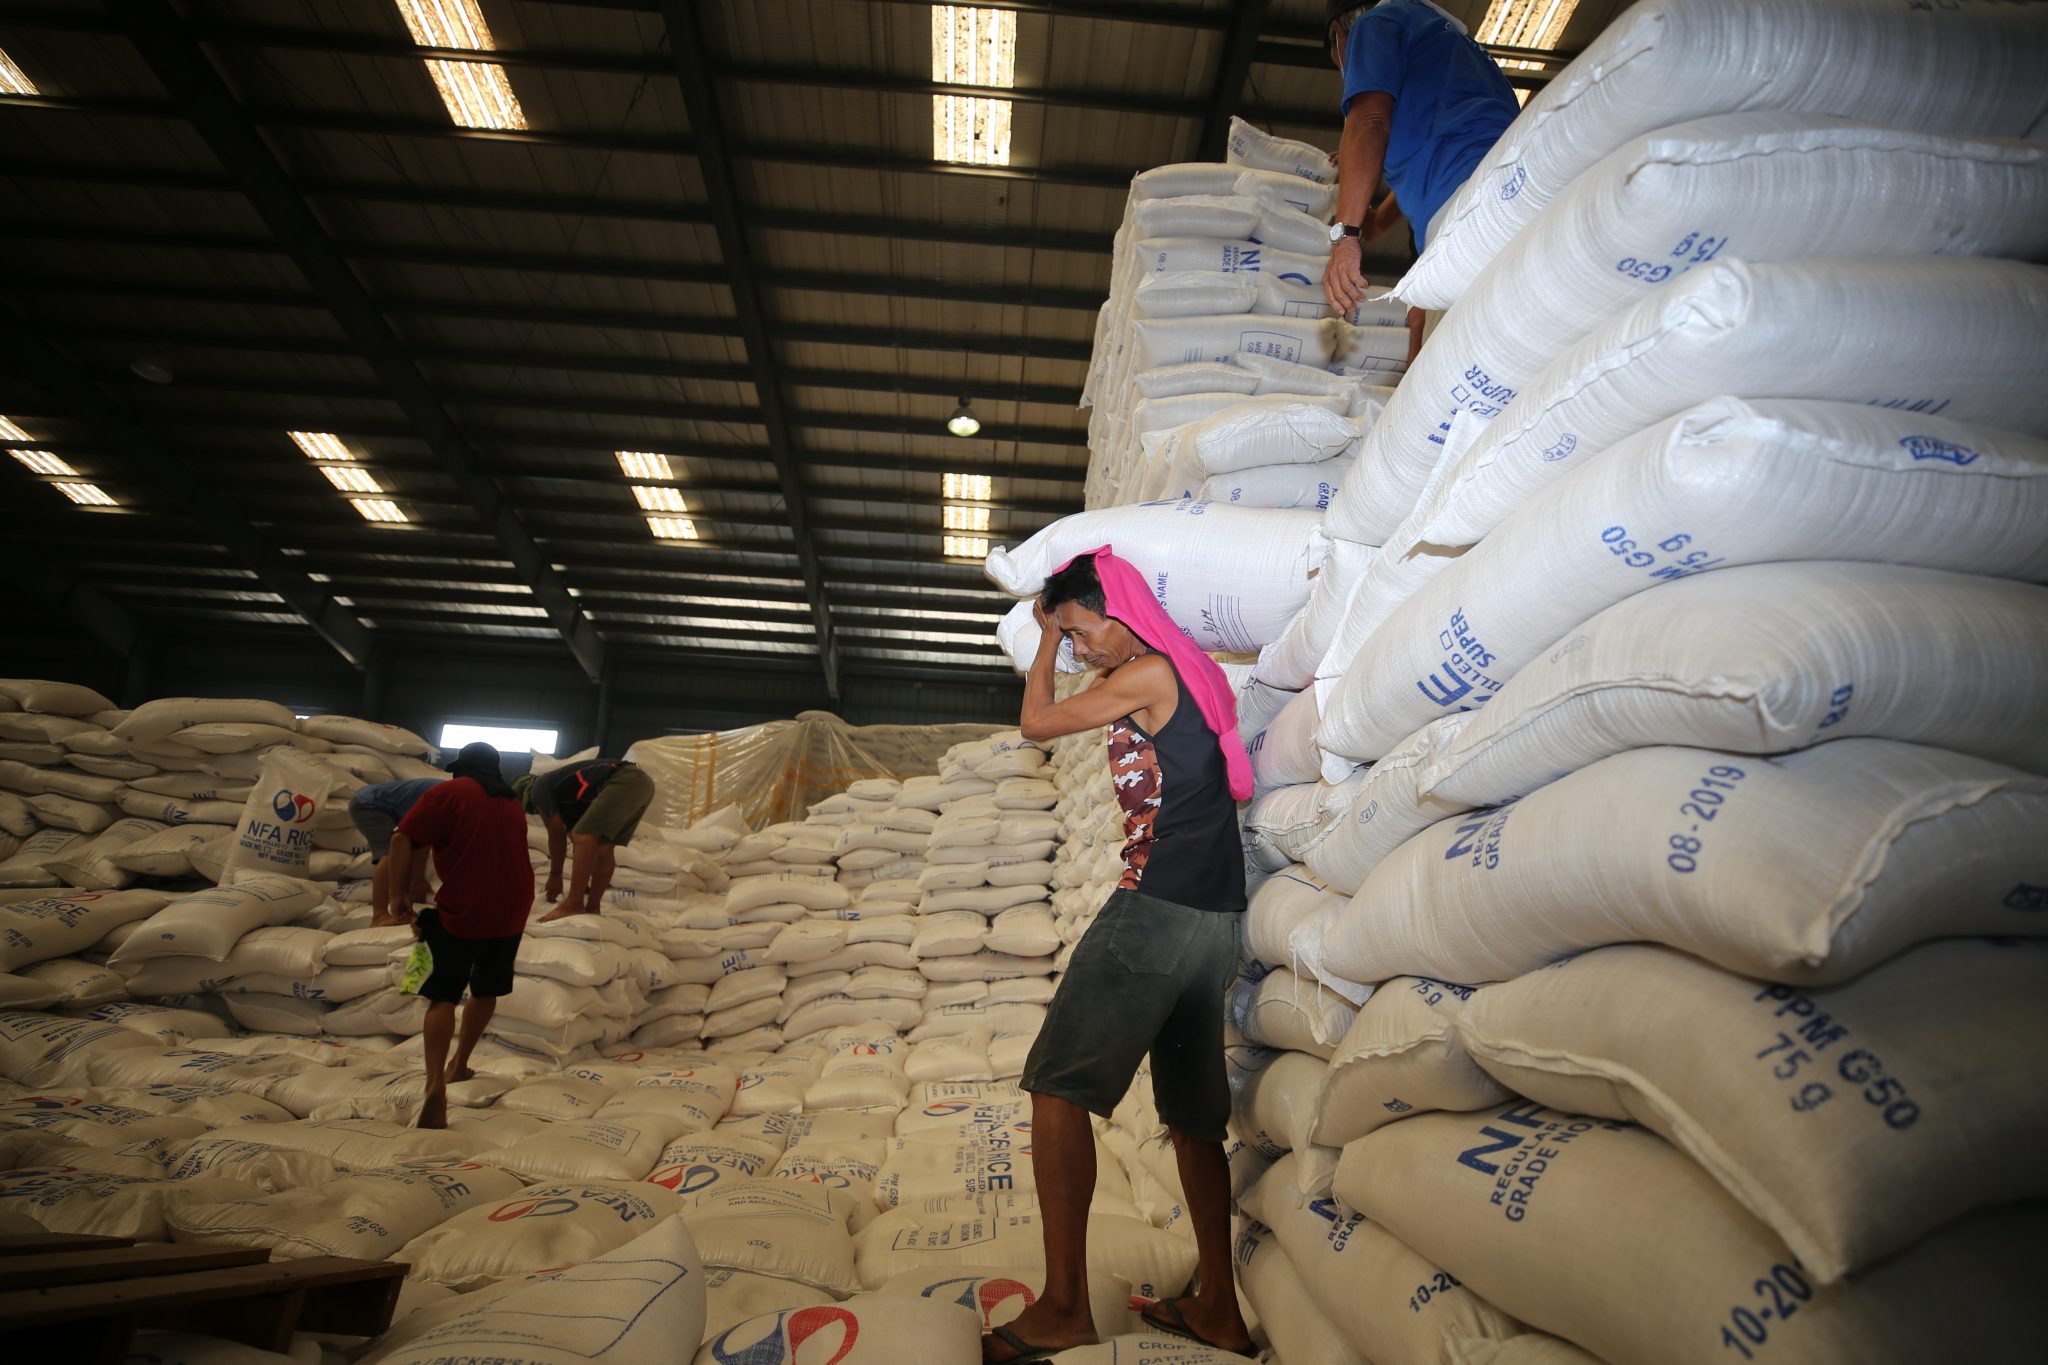 DA welcomes DTI’s decision to drop PITC rice import plan